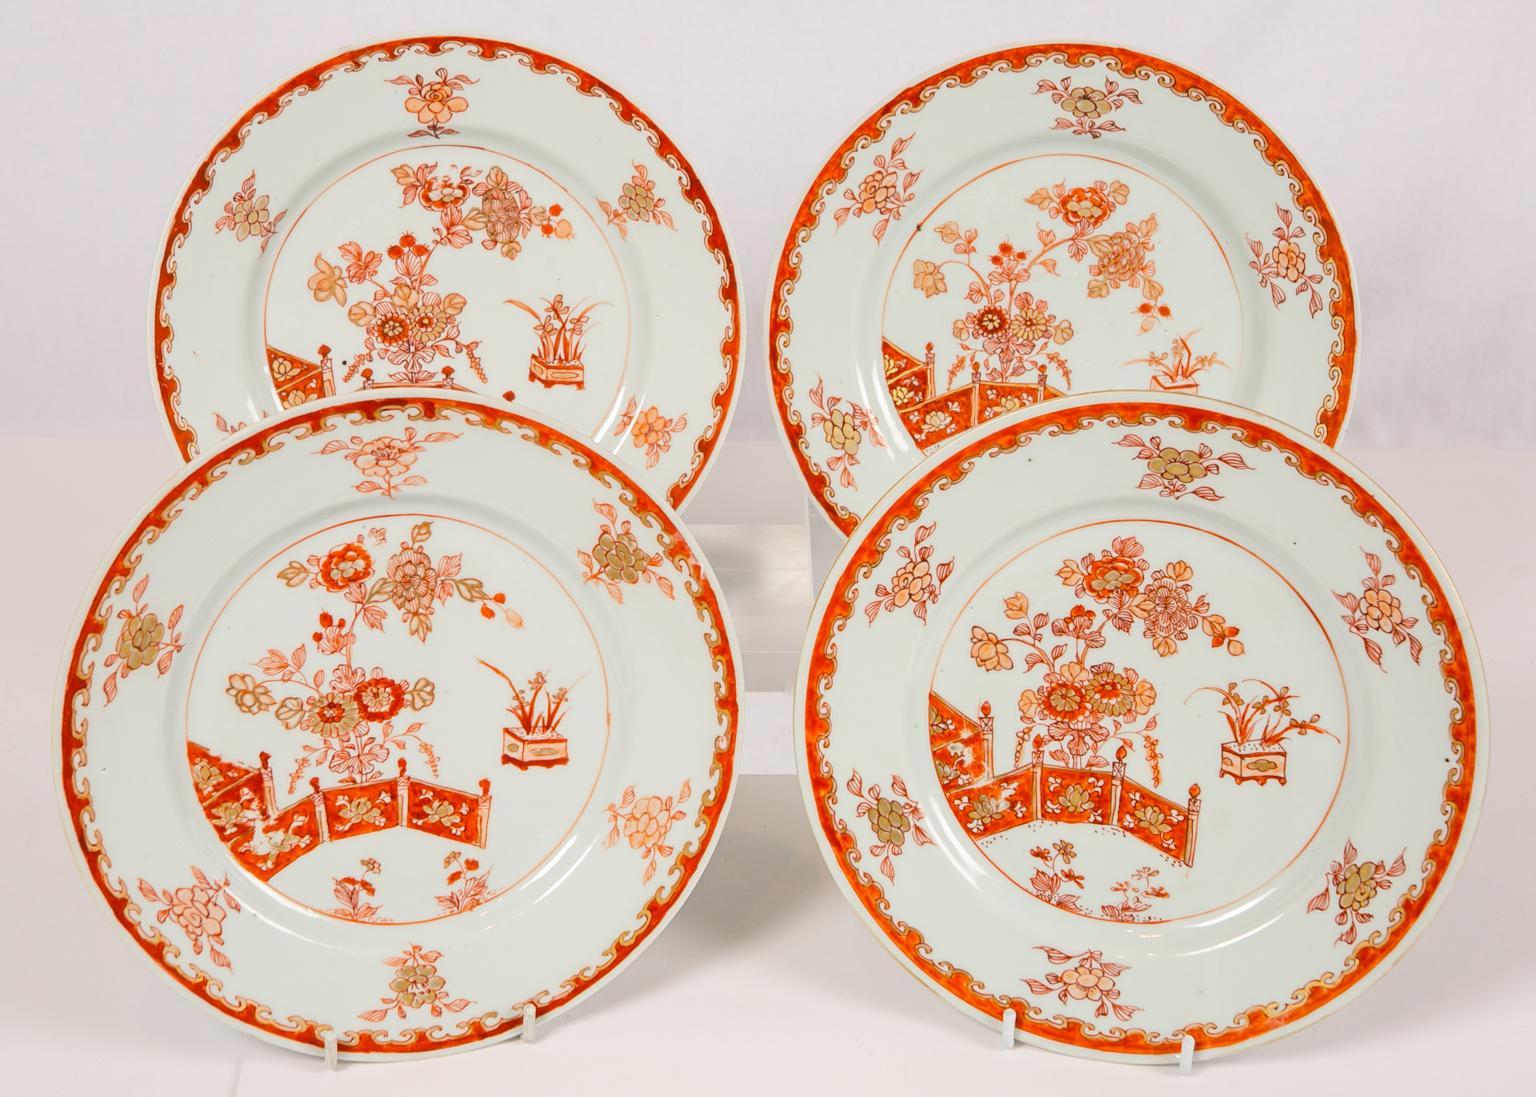 WHY WE LOVE IT: The orange is so beautiful
We are pleased to offer this set of four lovely Chinese export Rouge de Fer dessert plates, which date to the early 18th century, circa 1710. Painted in red and gold, the dishes show a garden with peonies